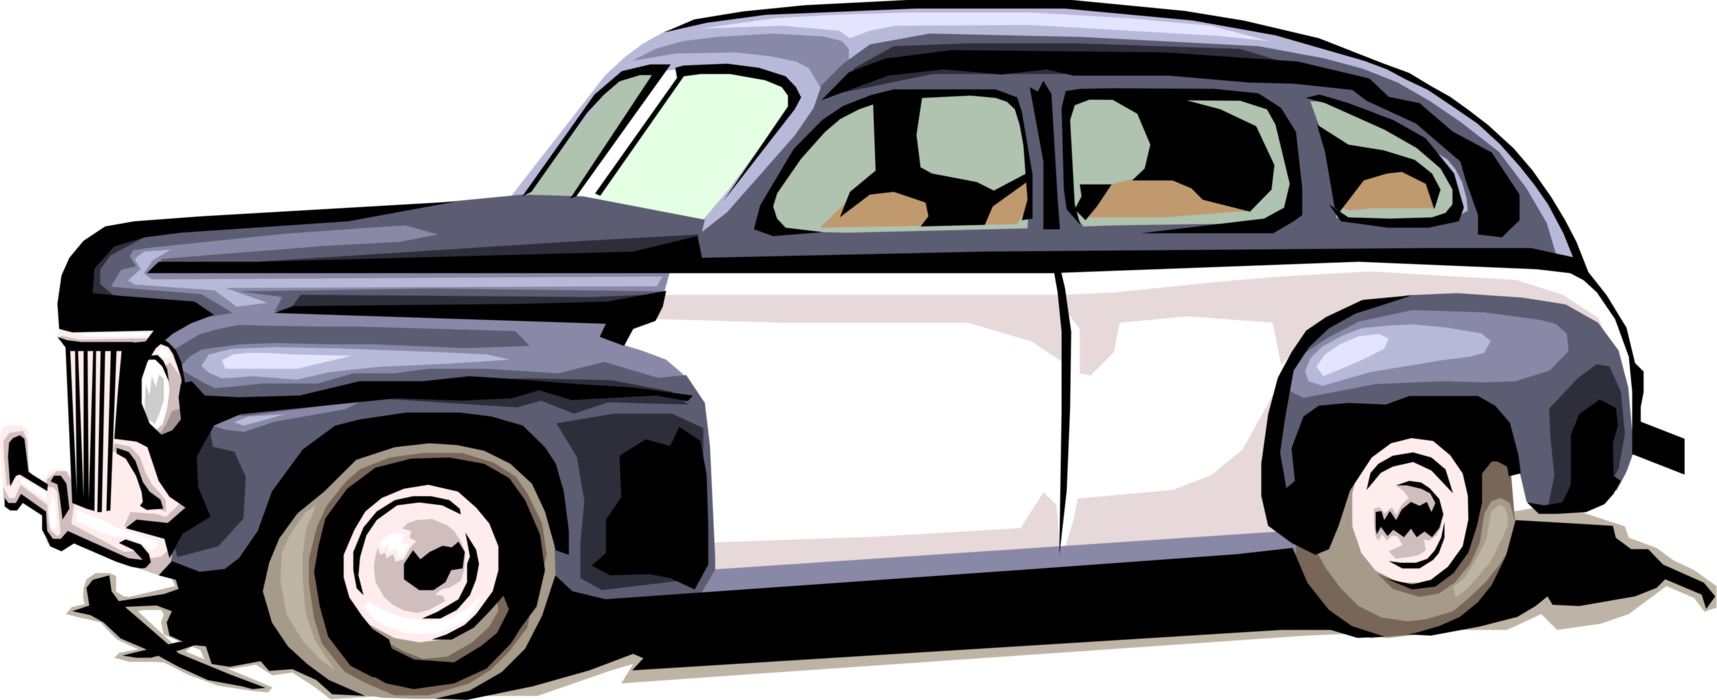 Vector Illustration of Classic Late Model Automobile Car Motor Vehicle 